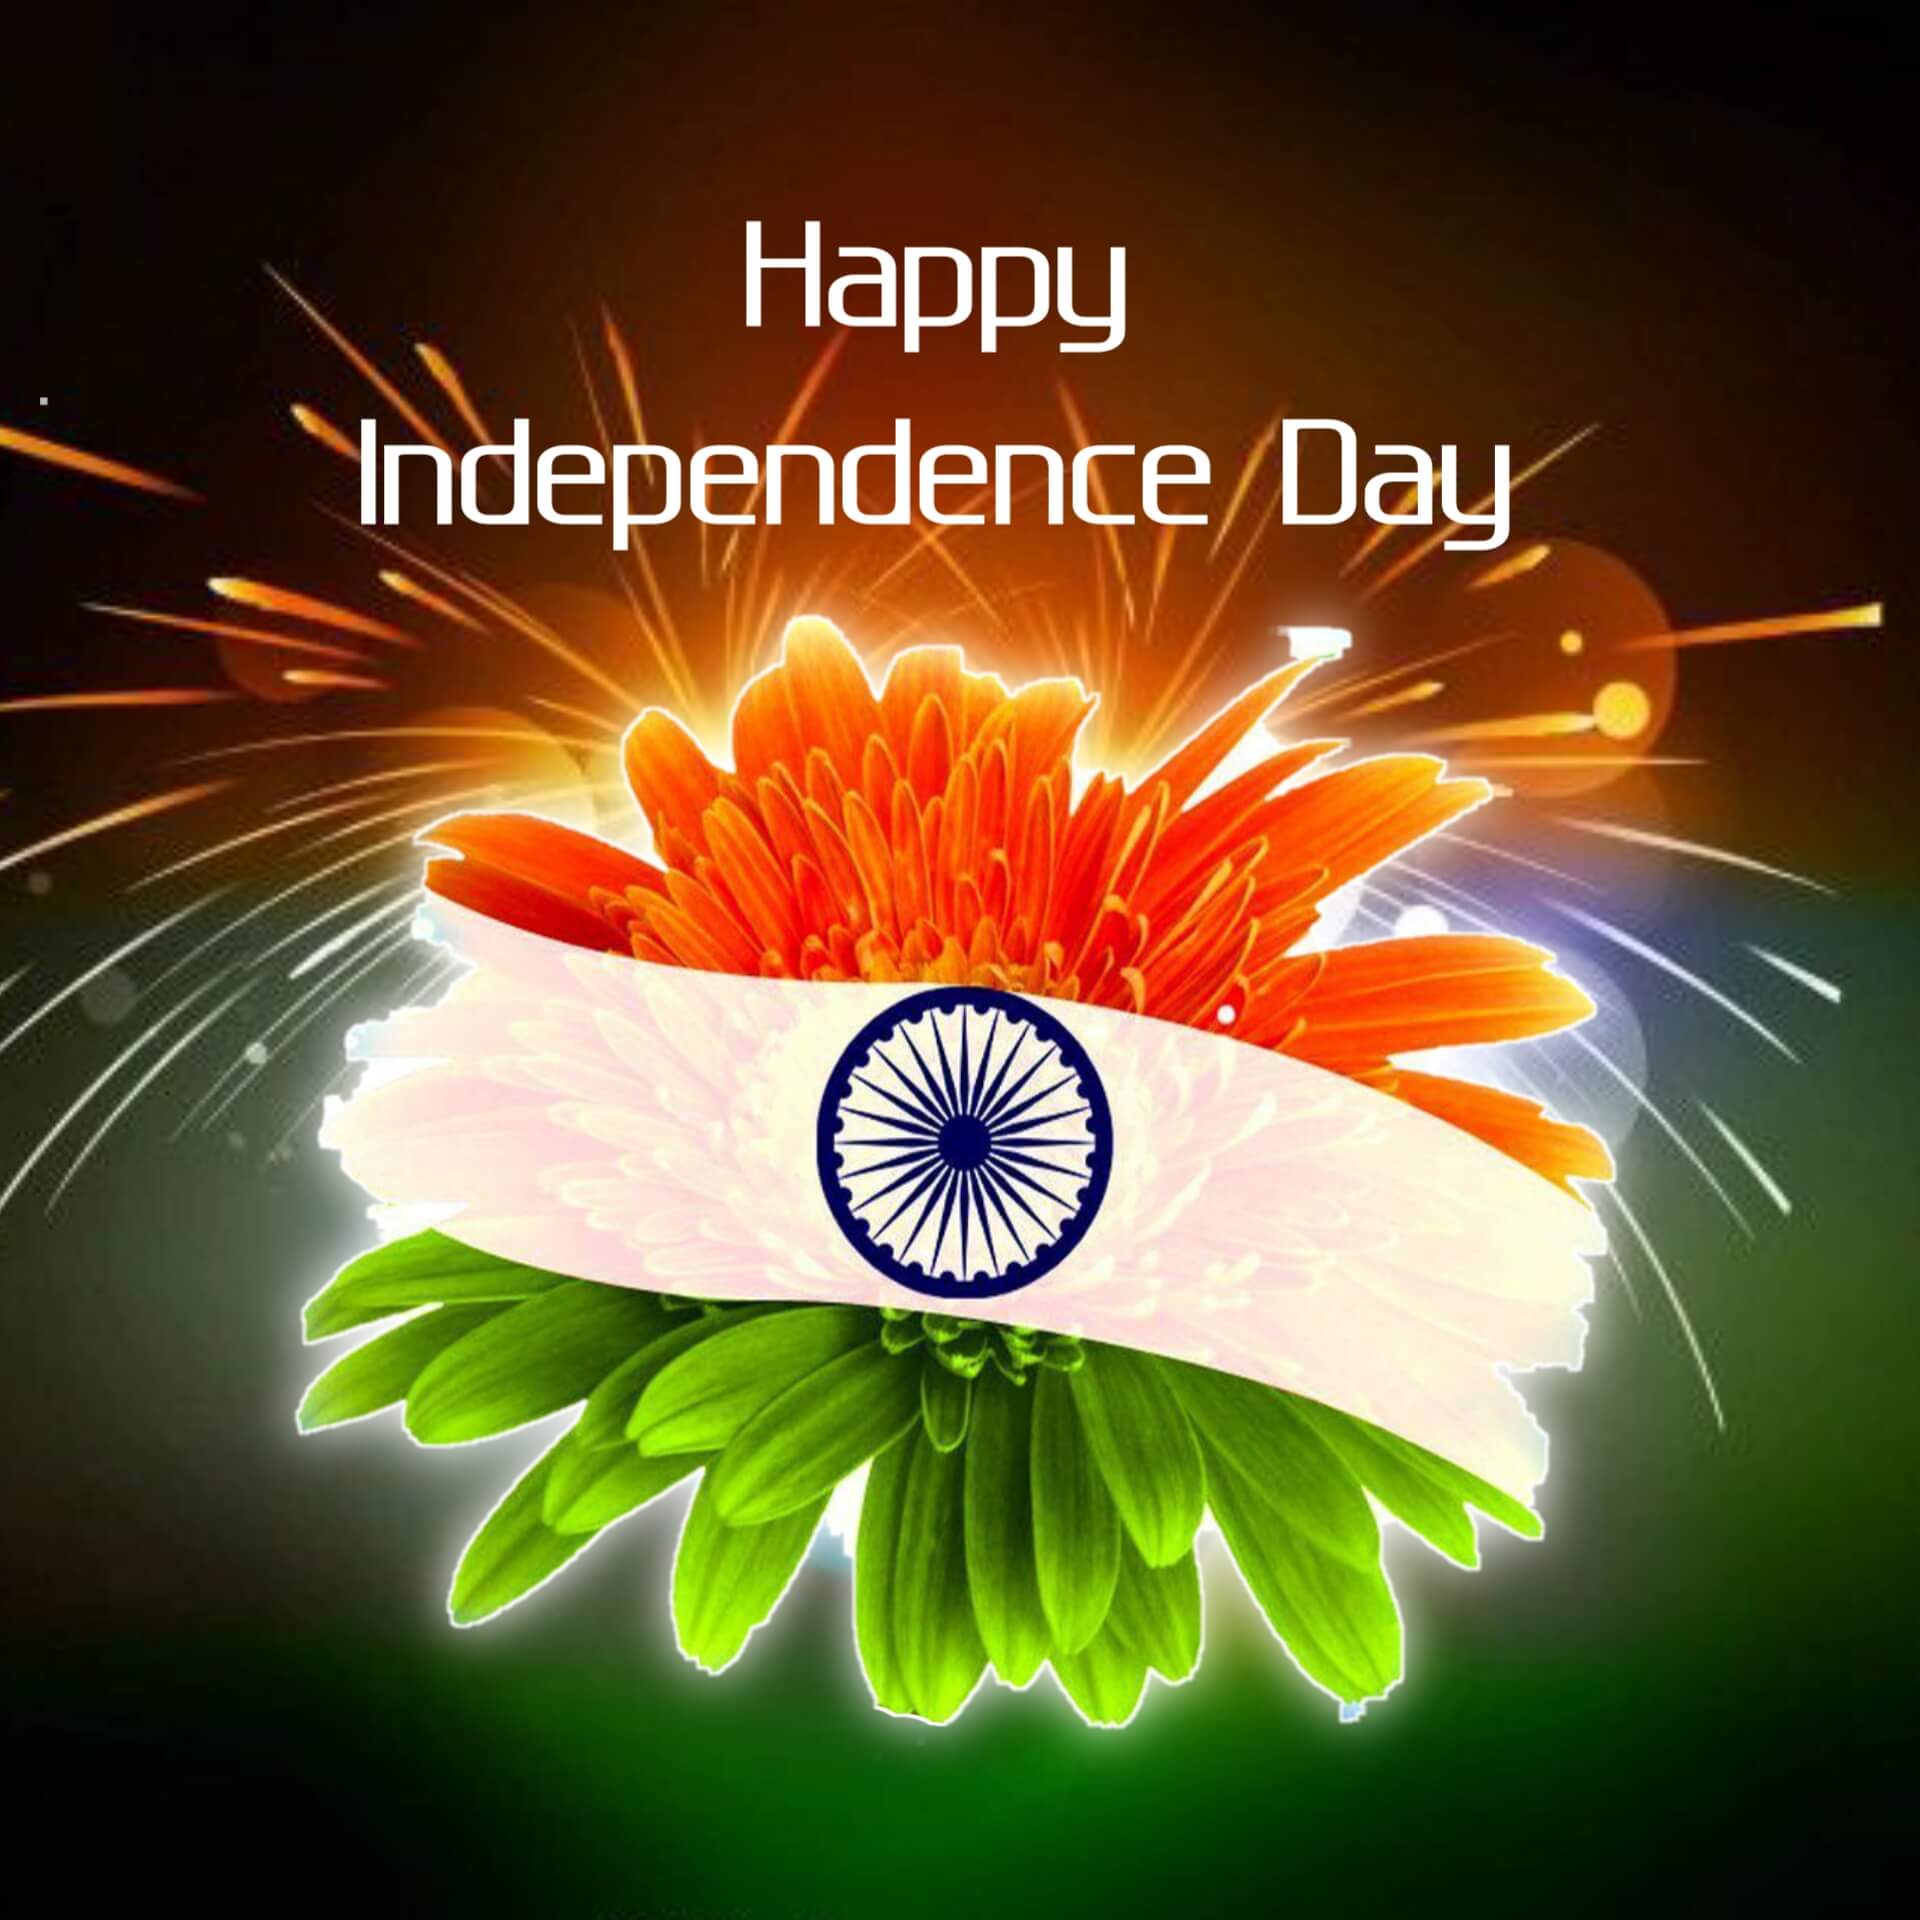 Best India Independence Day Image, Photo & Picture 2022